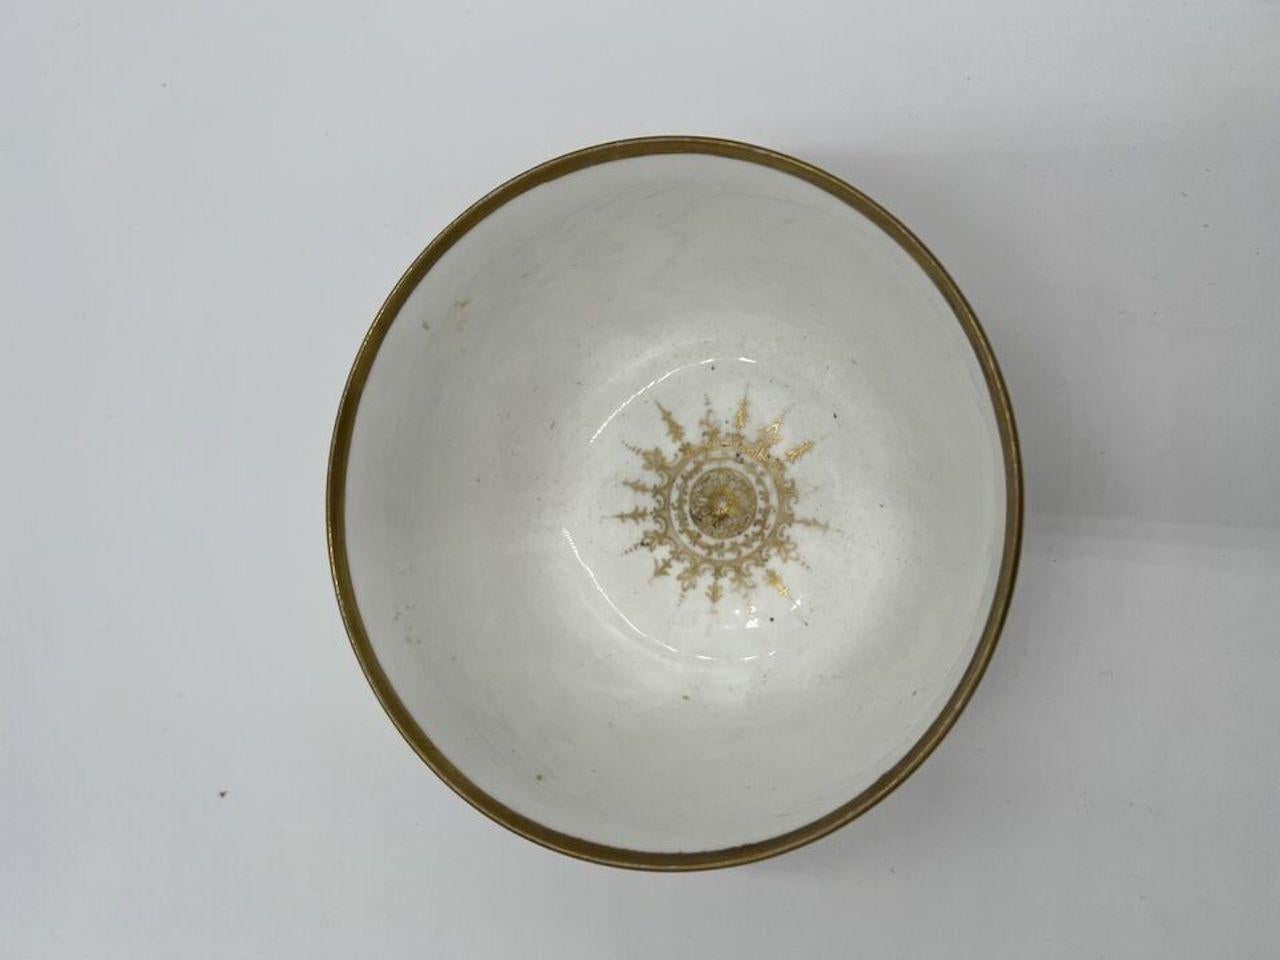 Antique English Mintons Porcelain Chinoiserie Waste Bowl Circa 1830 In Good Condition For Sale In Atlanta, GA